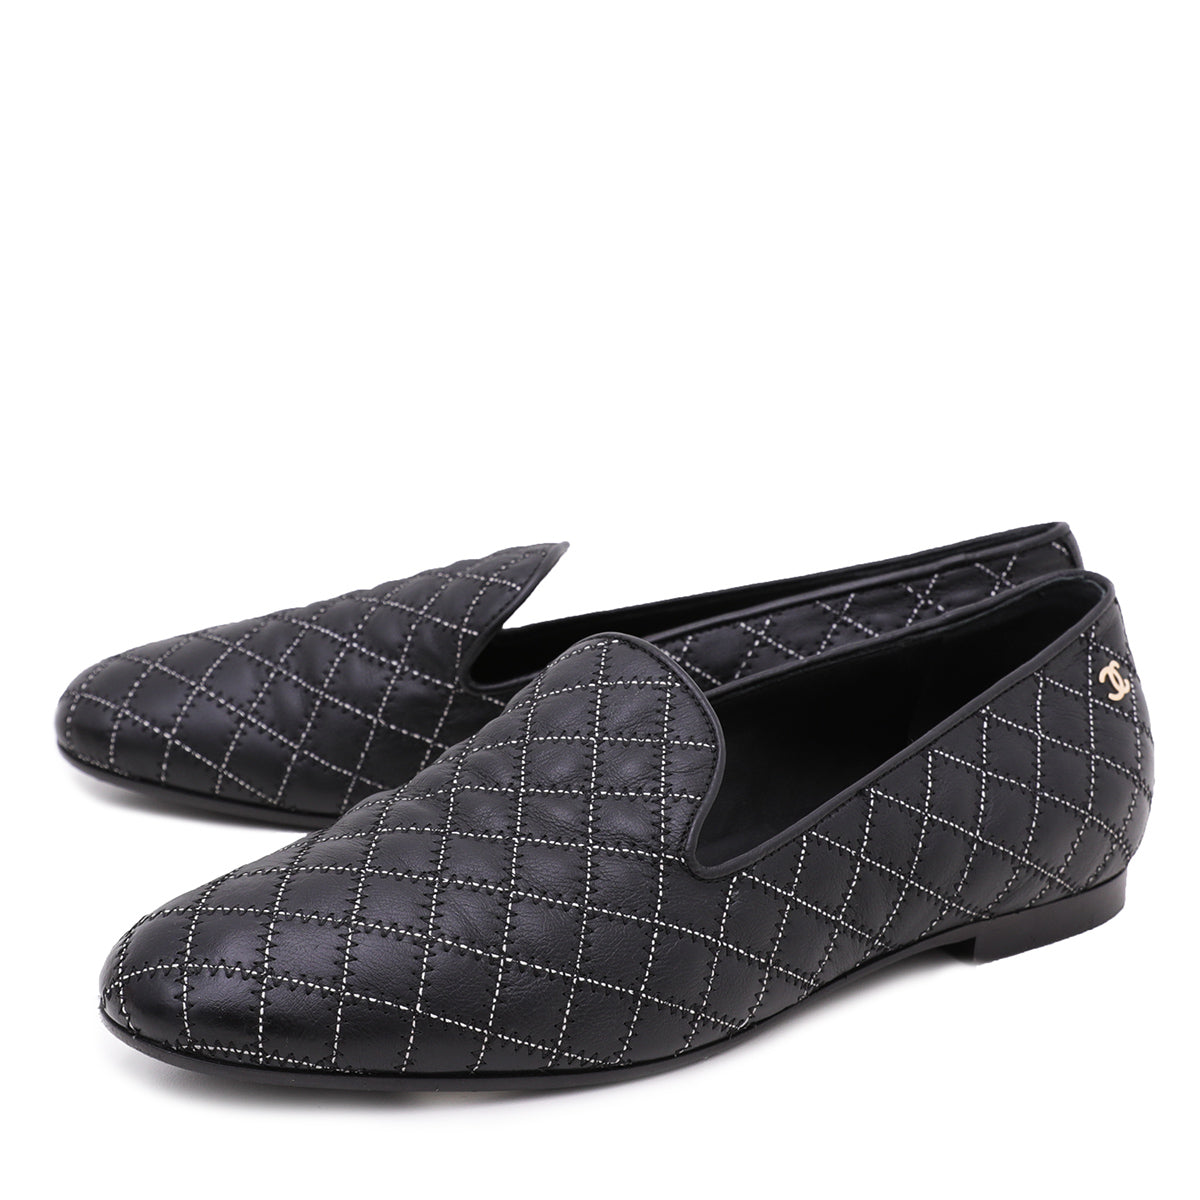 Chanel Black Zigzag & Contrast Diamond Moccasin Loafers 39